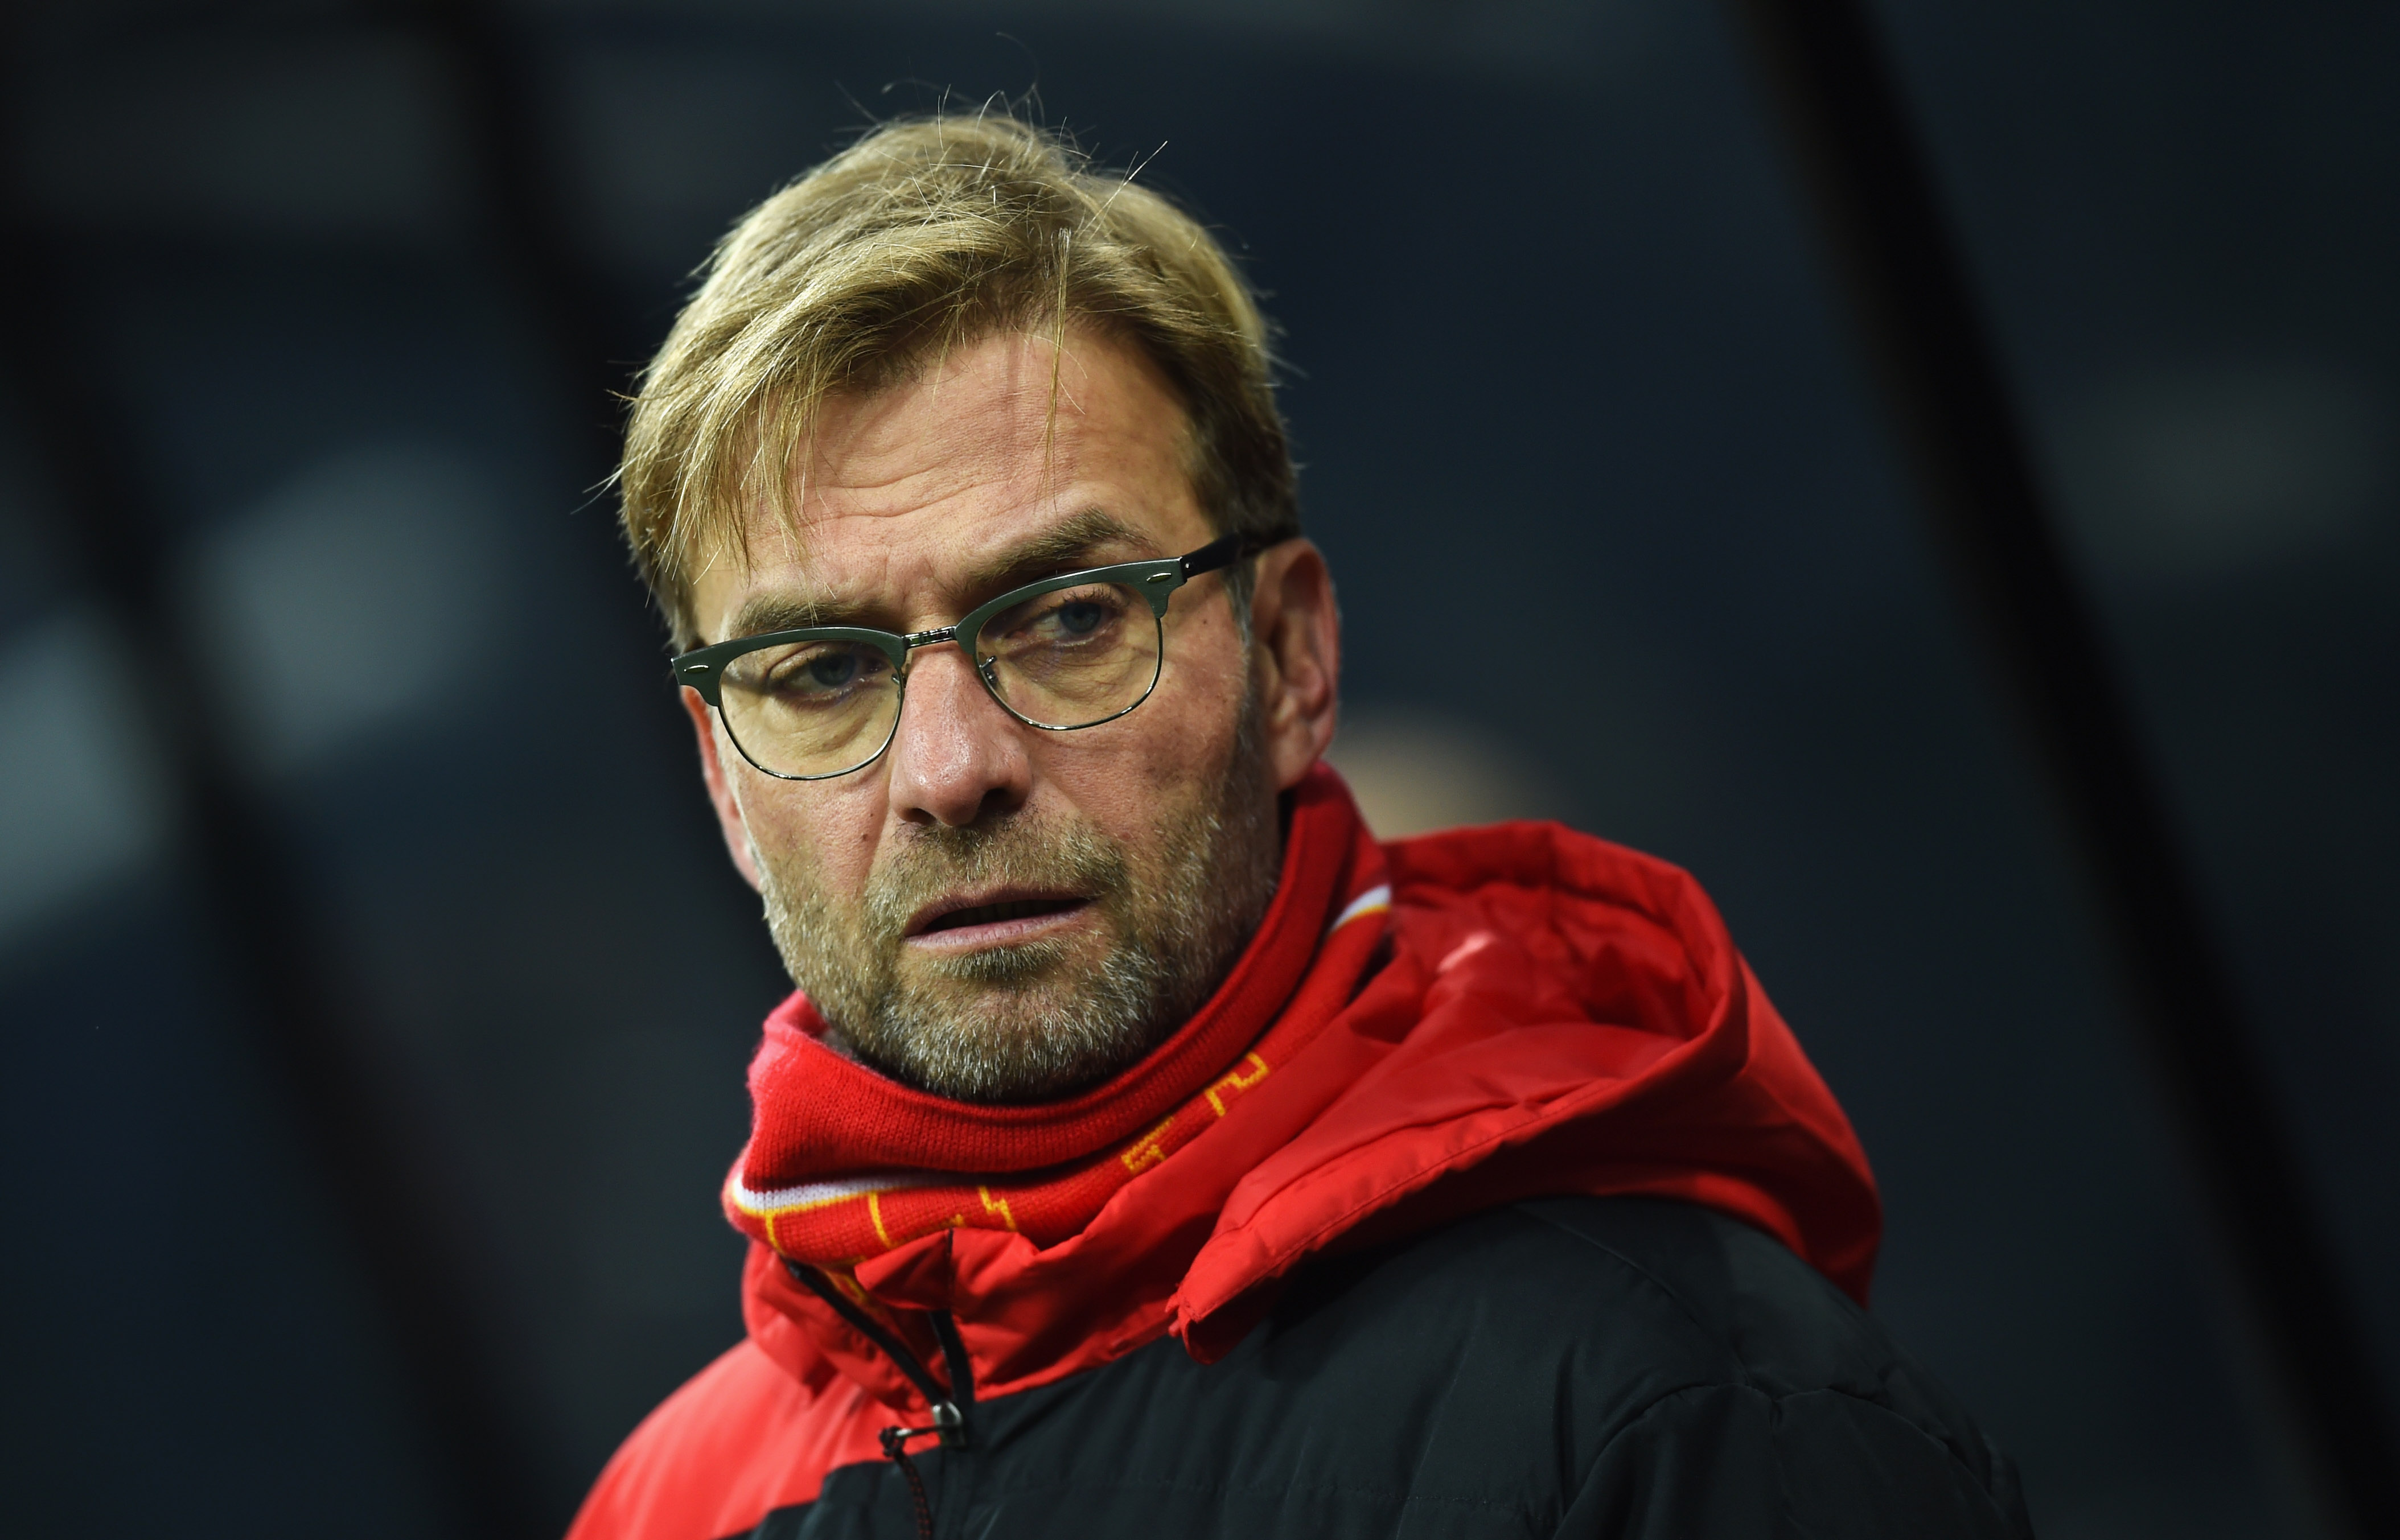 Liverpool , Liverpool Sion, Liverpool lineup, Liverpool lineup, Liverpool Sion lineup, stream, online, channel, when, time, watch, free, live